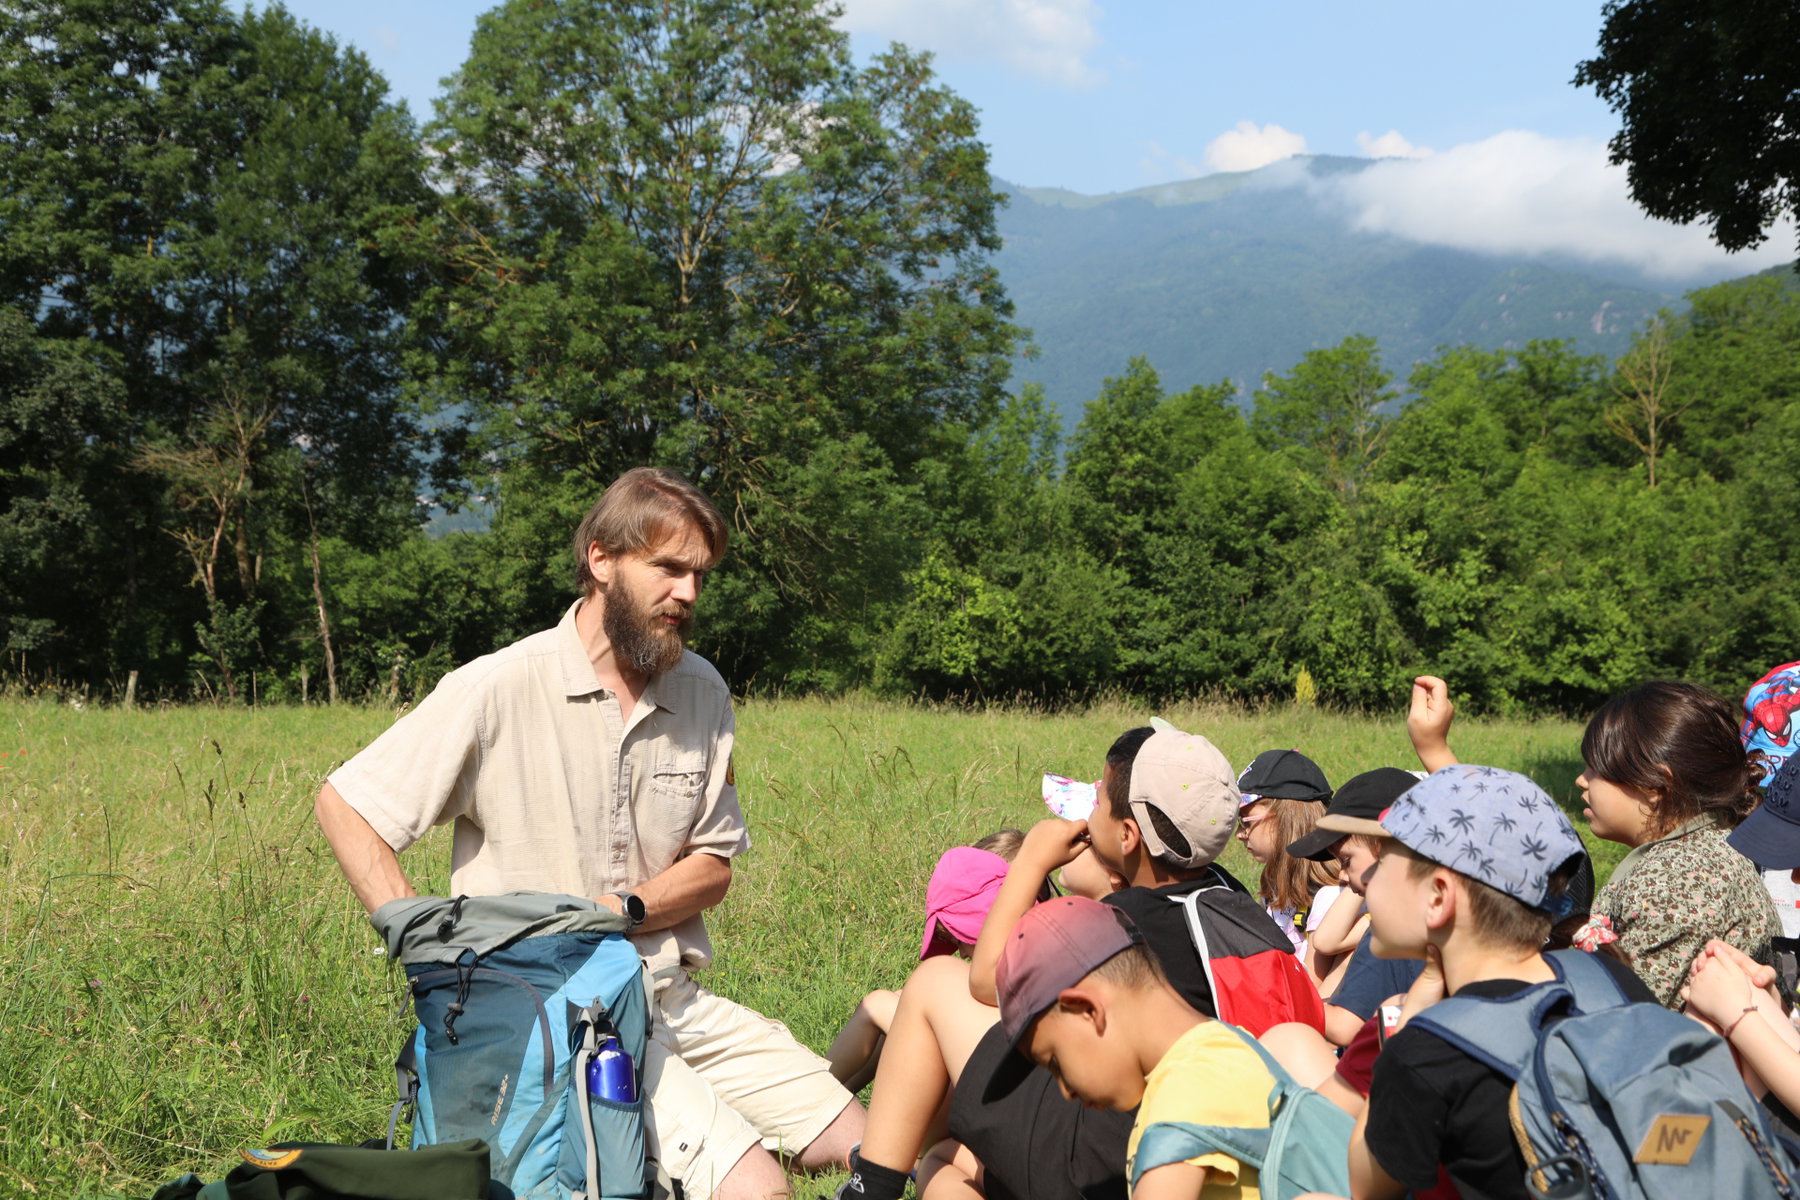 A mountain guide talks to a group of school children in a field with mountains in the background.